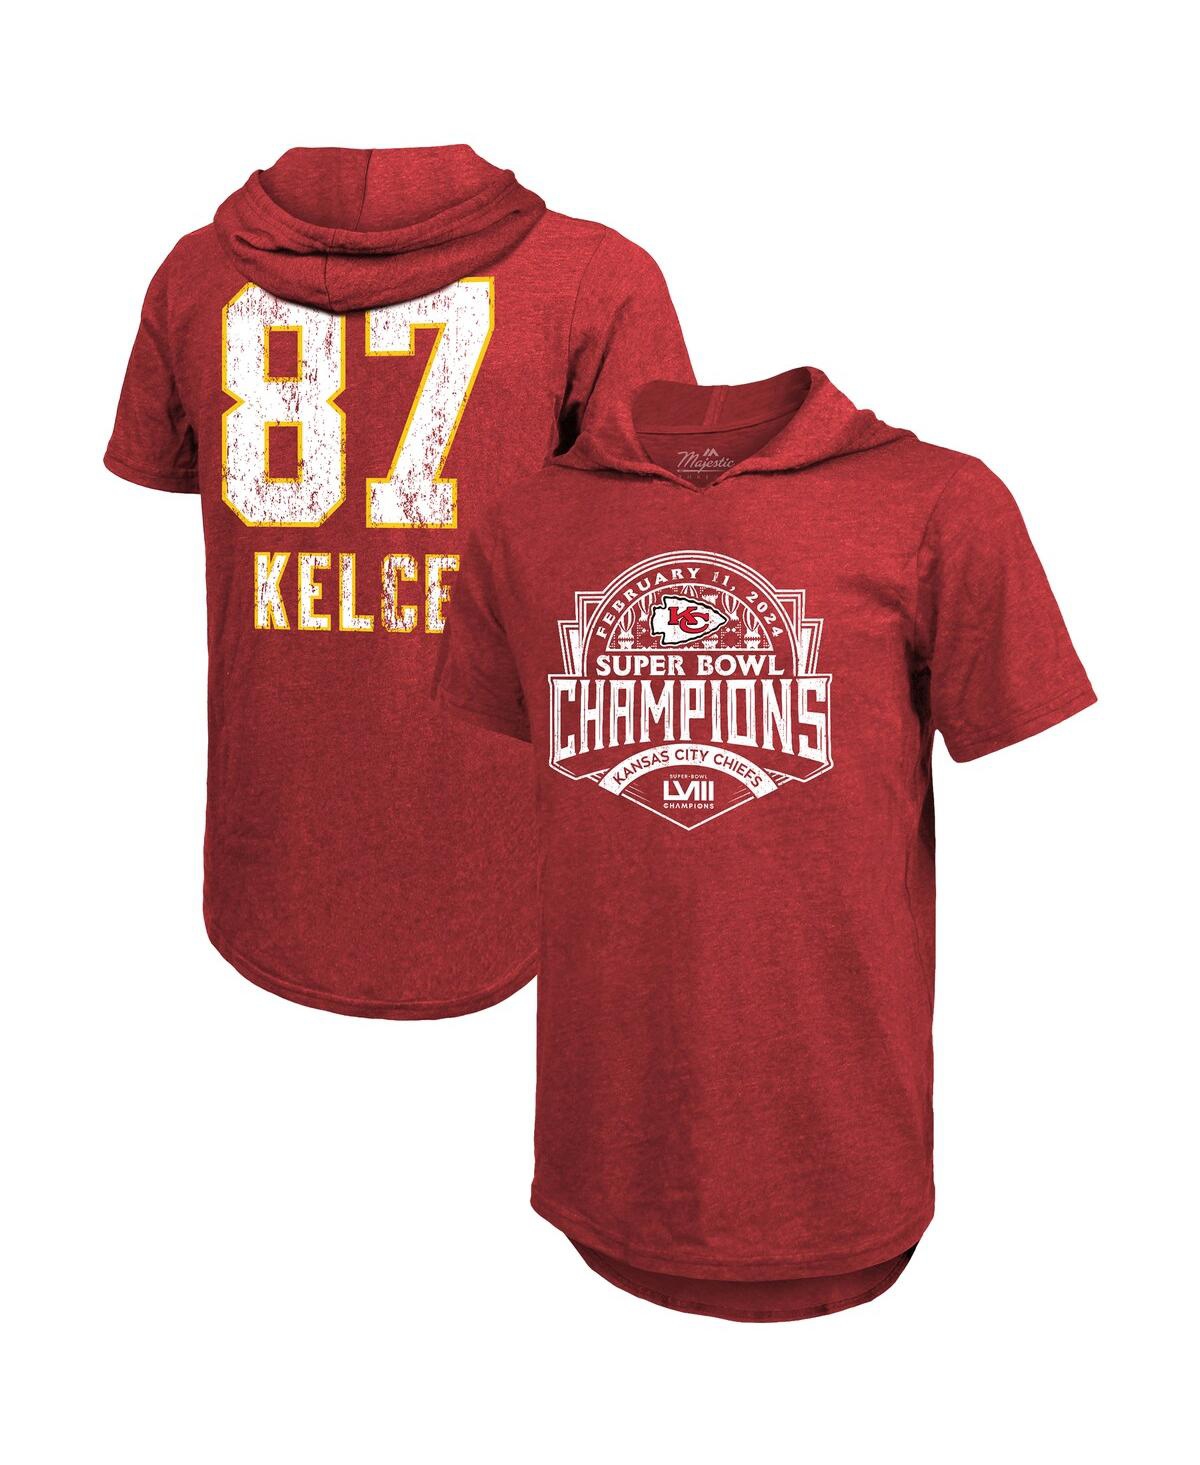 Men's Majestic Threads Travis Kelce Red Distressed Kansas City Chiefs Super Bowl Lviii Player Name and Number Tri-Blend Hoodie T-Shirt - Red